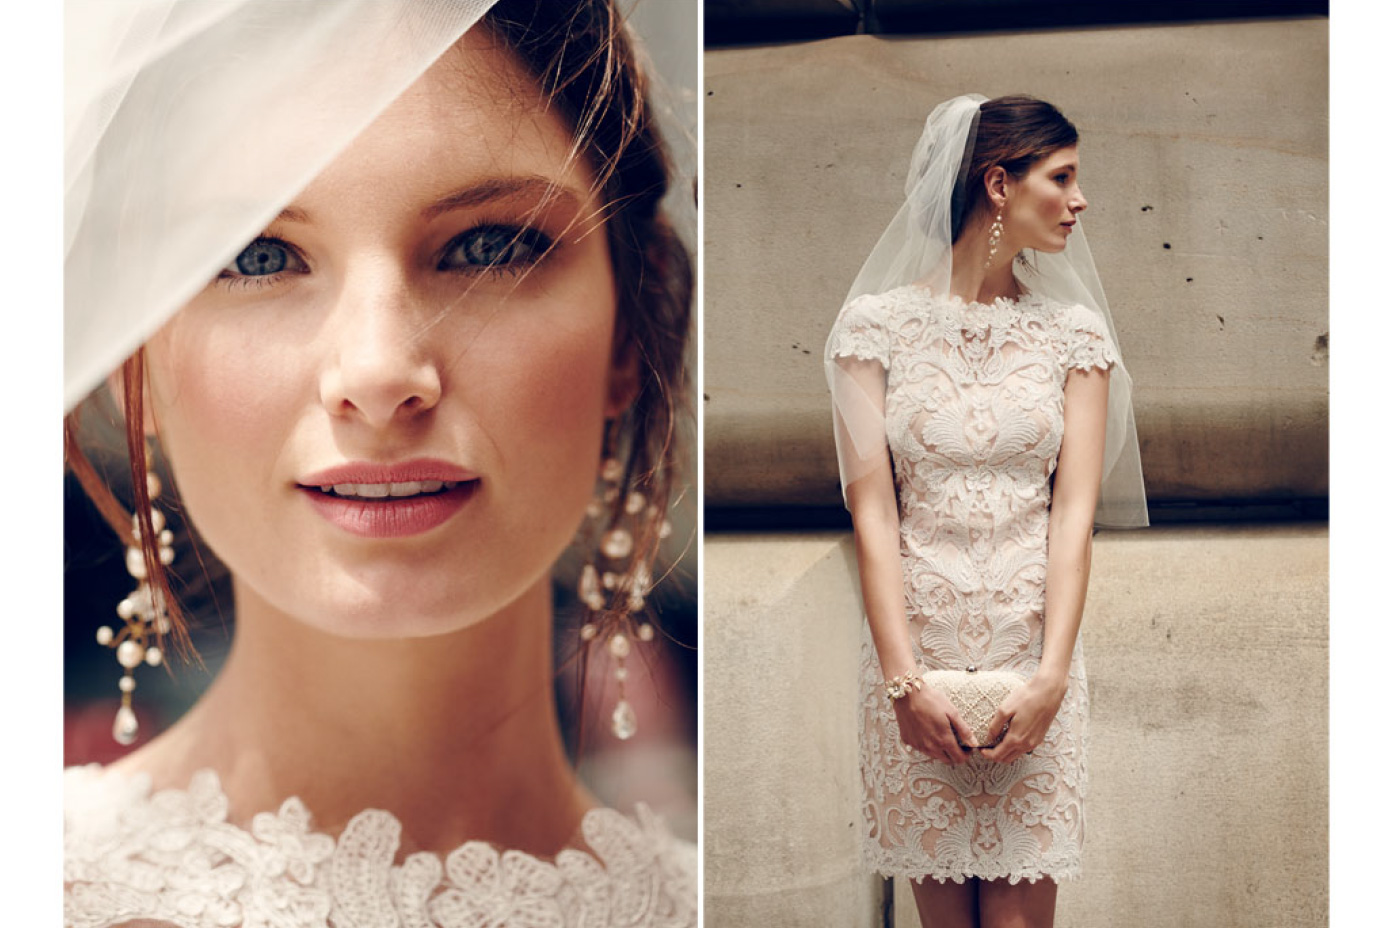 Shooting for BHLDN in New York City and Brooklyn